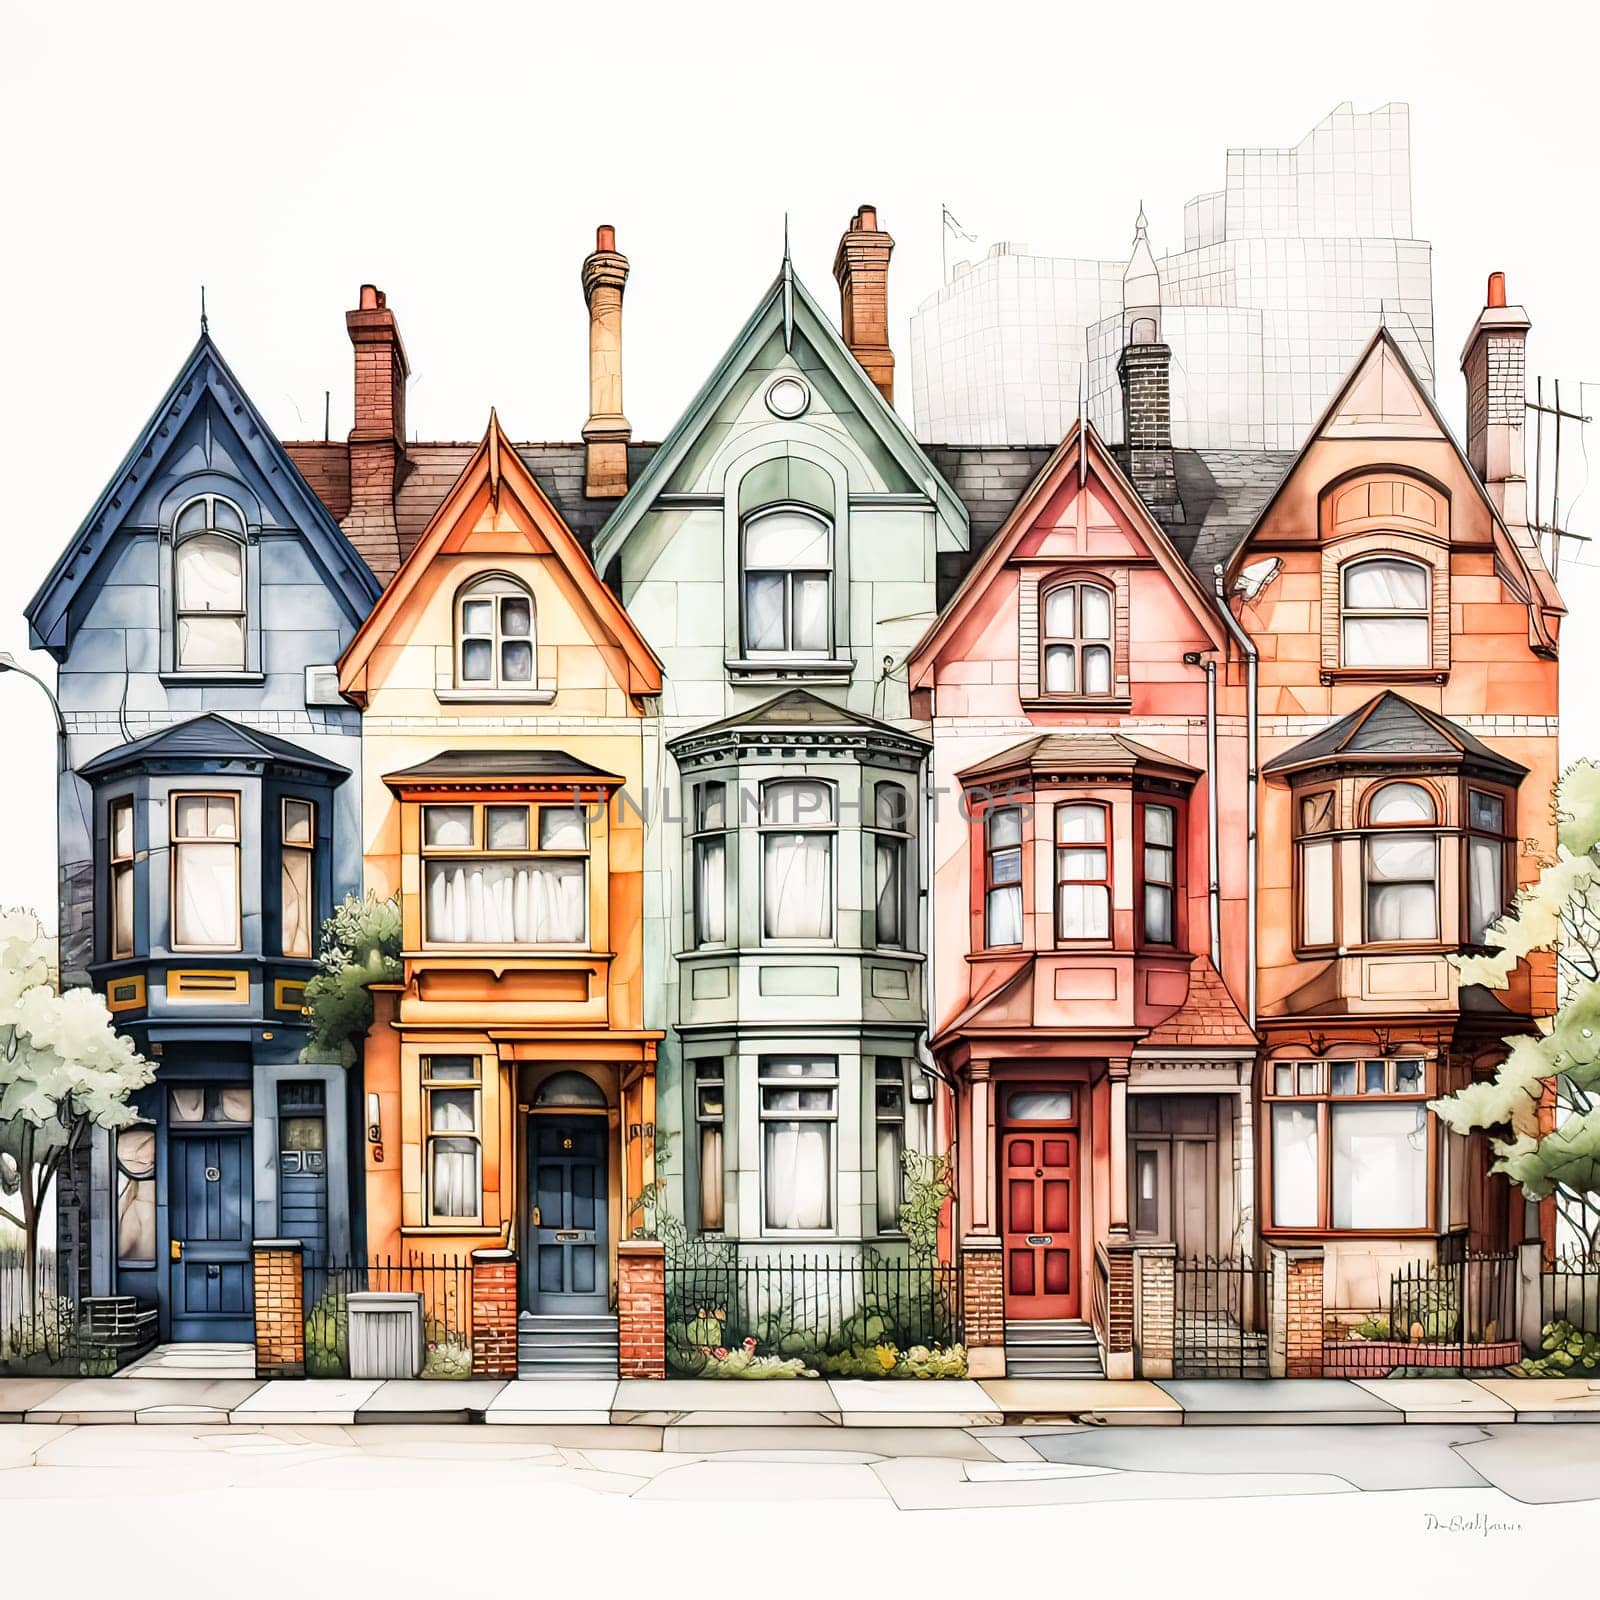 Architectural Beauty, Watercolor art showcases intricate European house details in a picturesque sketch